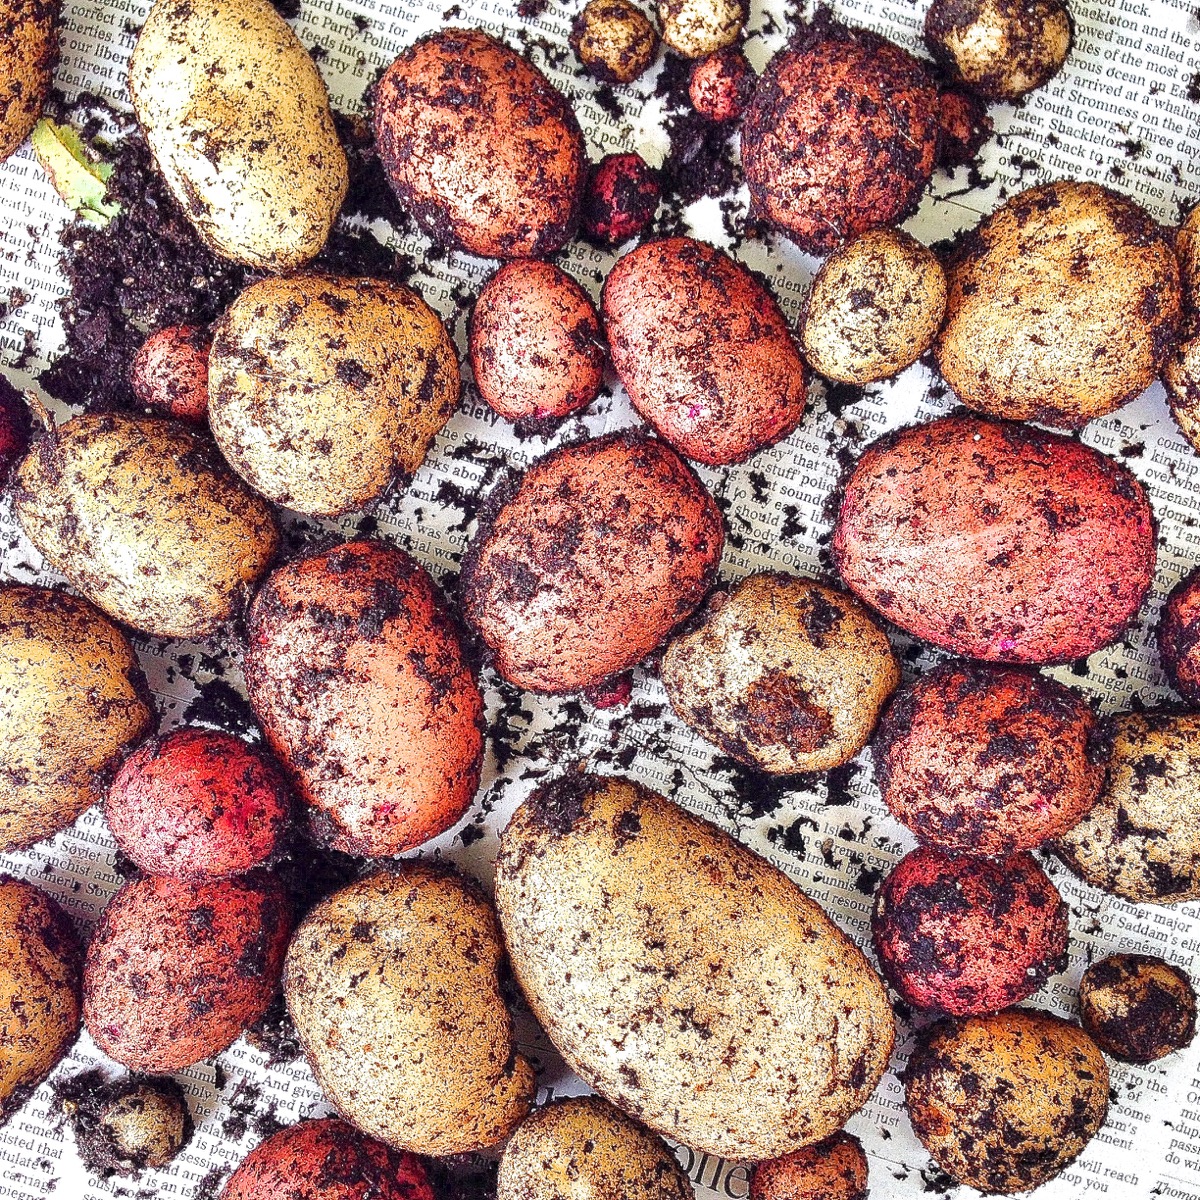 Freshly harvested red and white potatoes drying off on newsprint prior to storage.